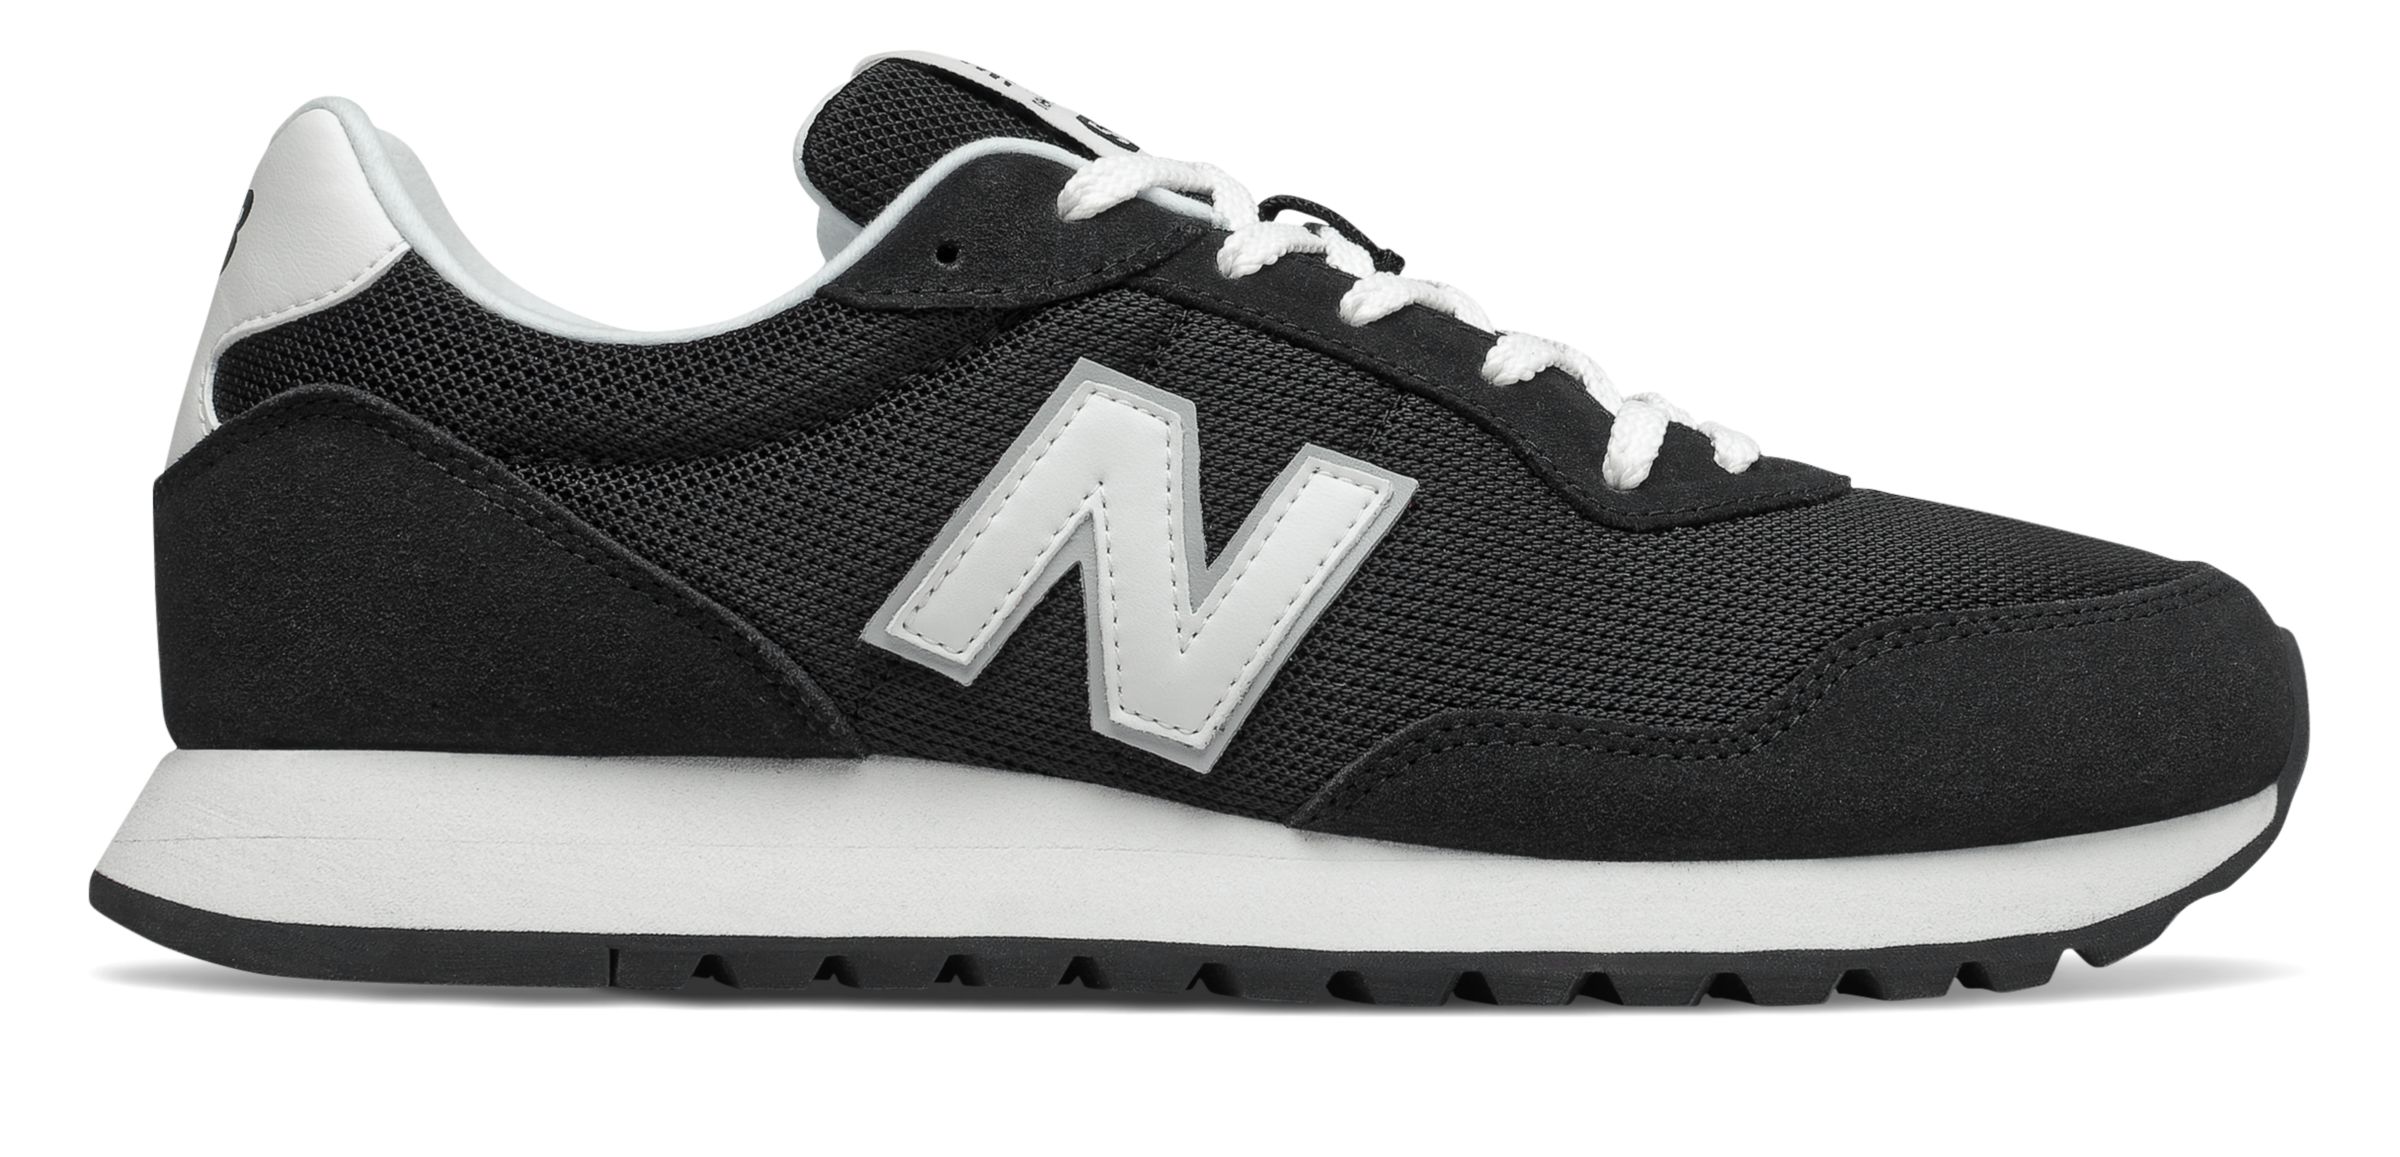 best new balance shoes for standing all day